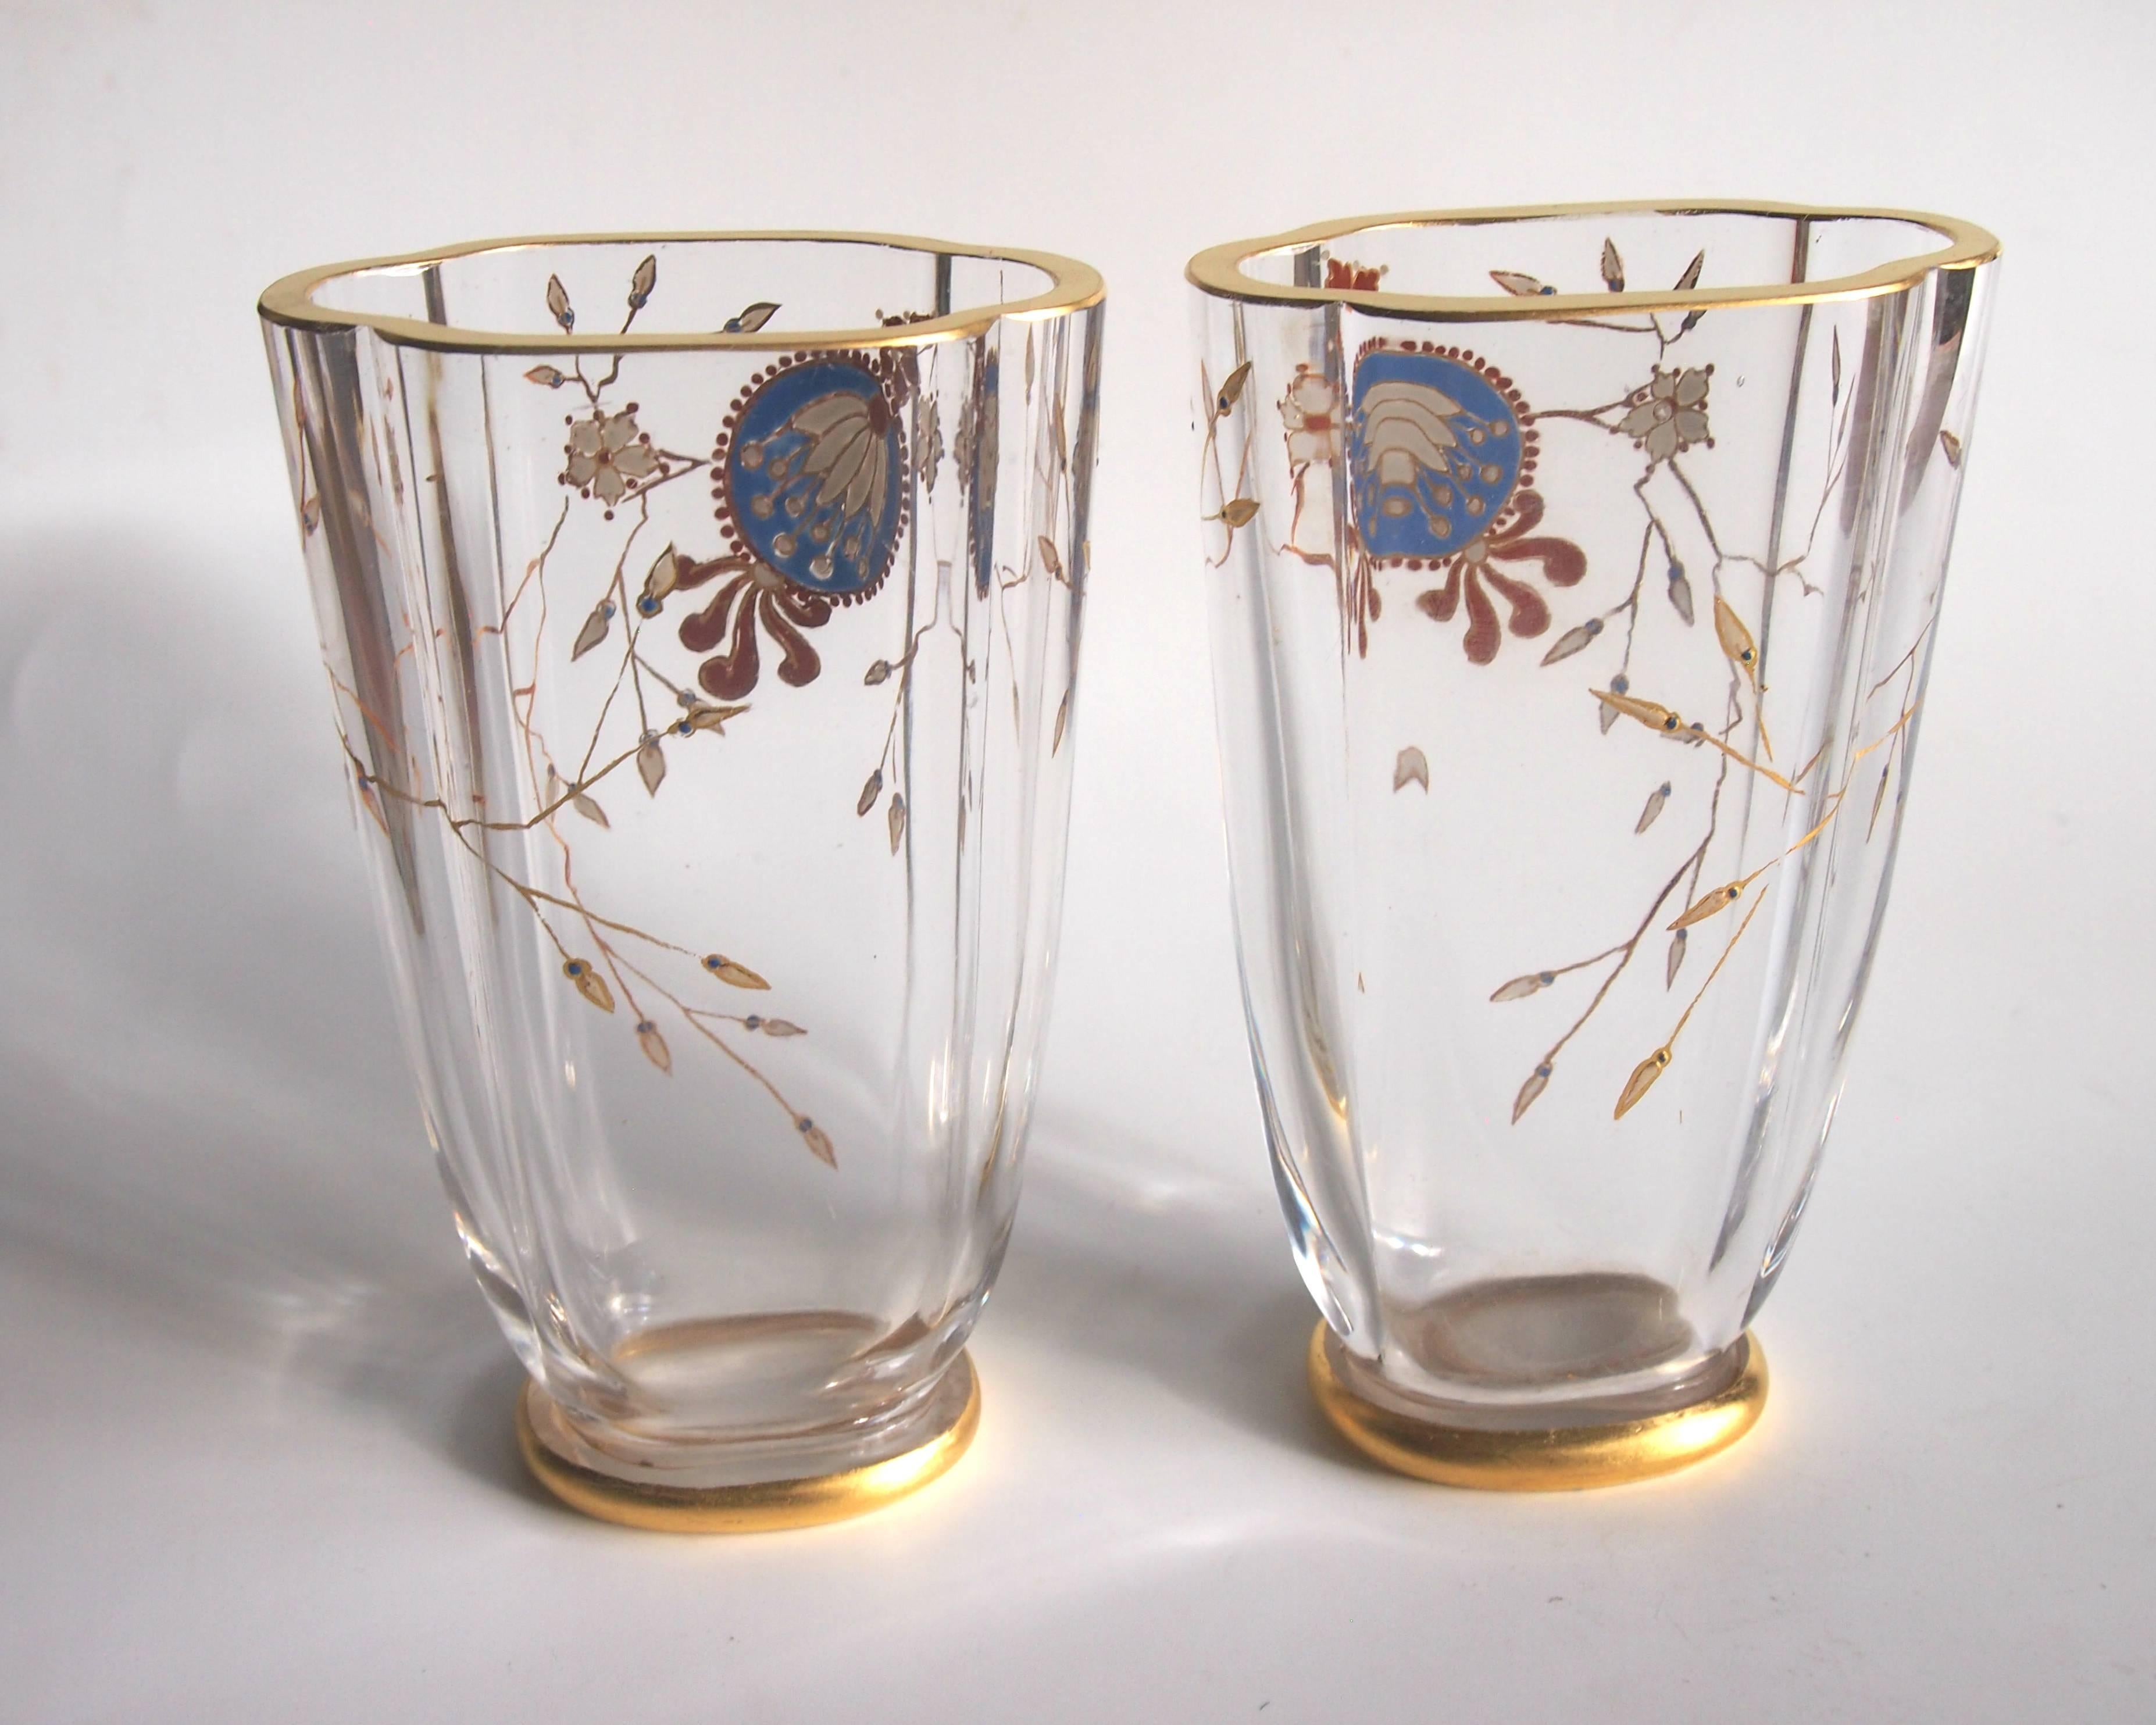 French Baccarat Pair of Chinoiserie Enamel Vases